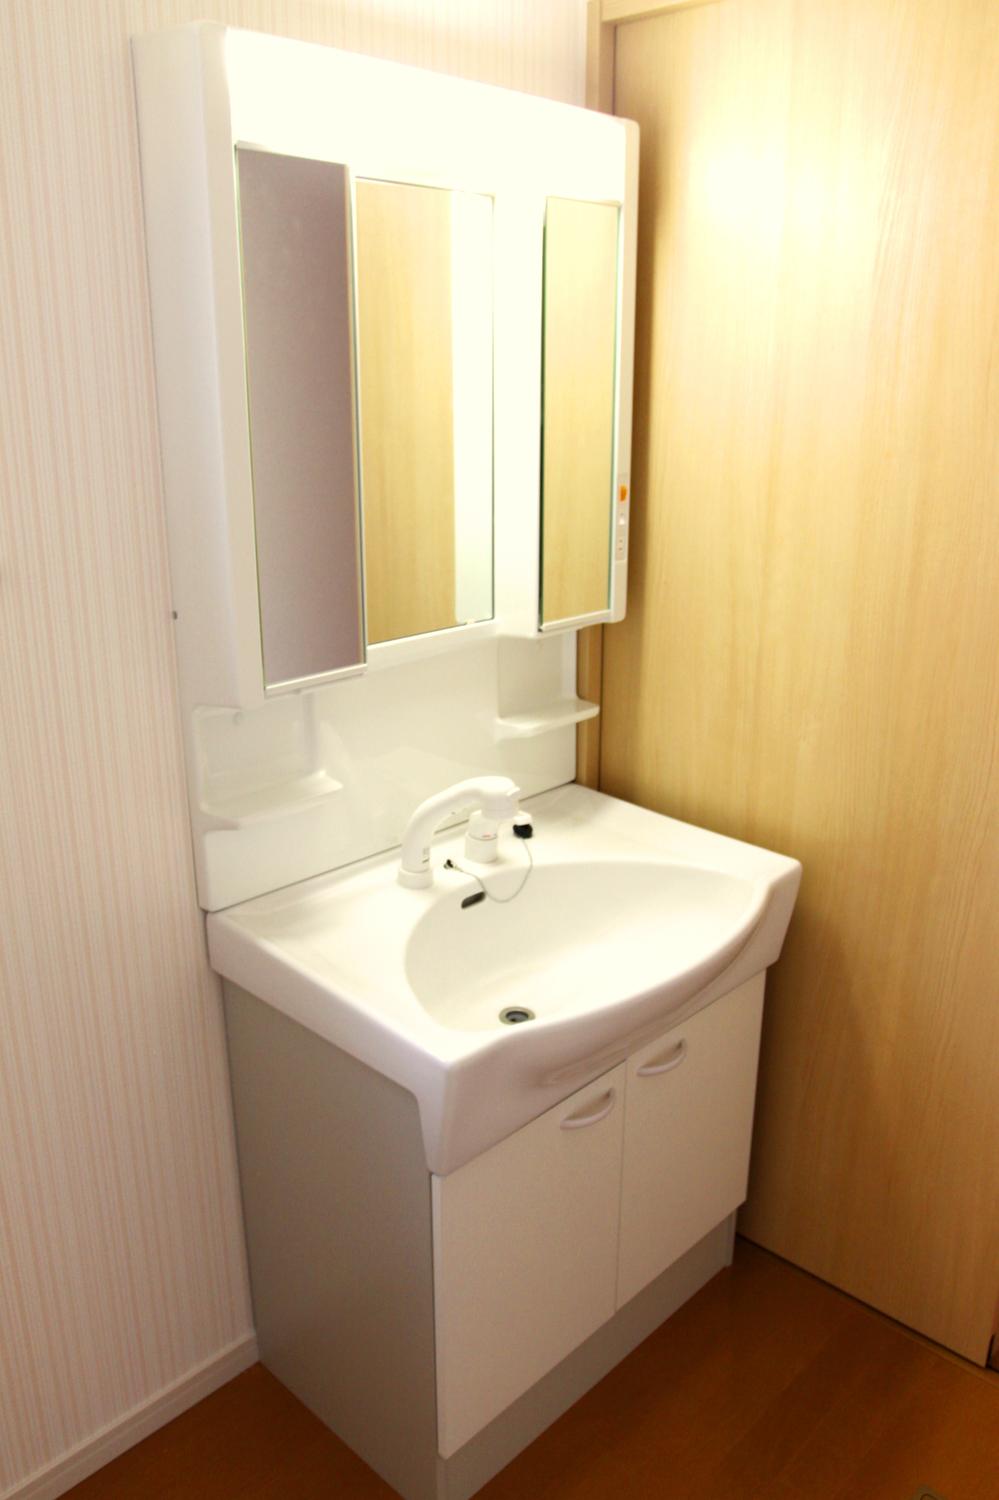 Wash basin, toilet. Same specifications is a picture.